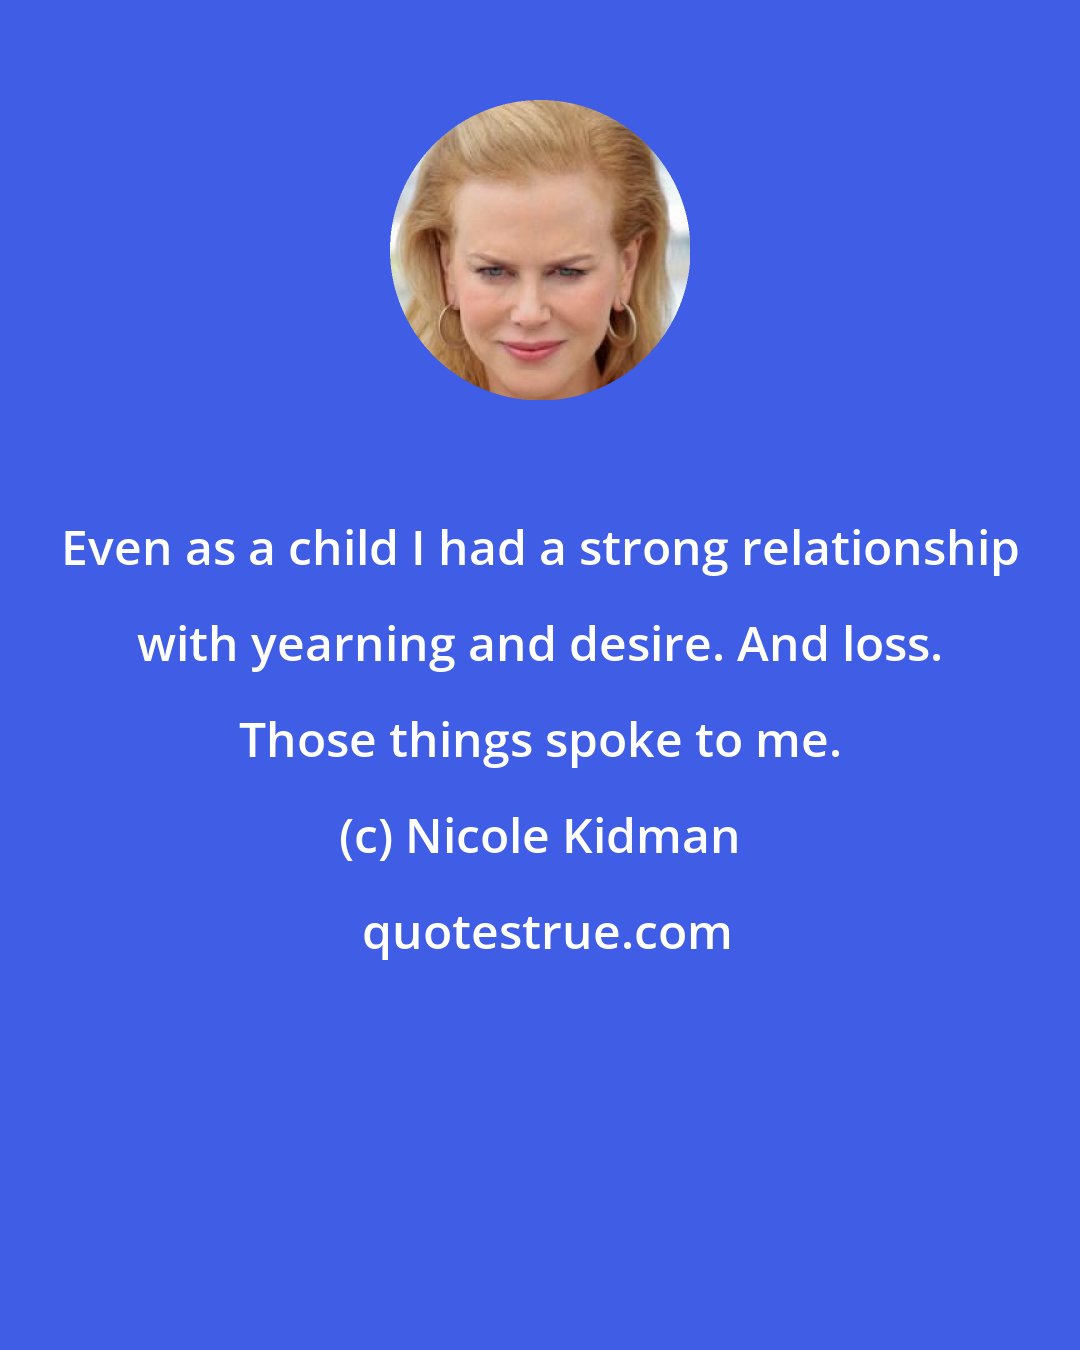 Nicole Kidman: Even as a child I had a strong relationship with yearning and desire. And loss. Those things spoke to me.